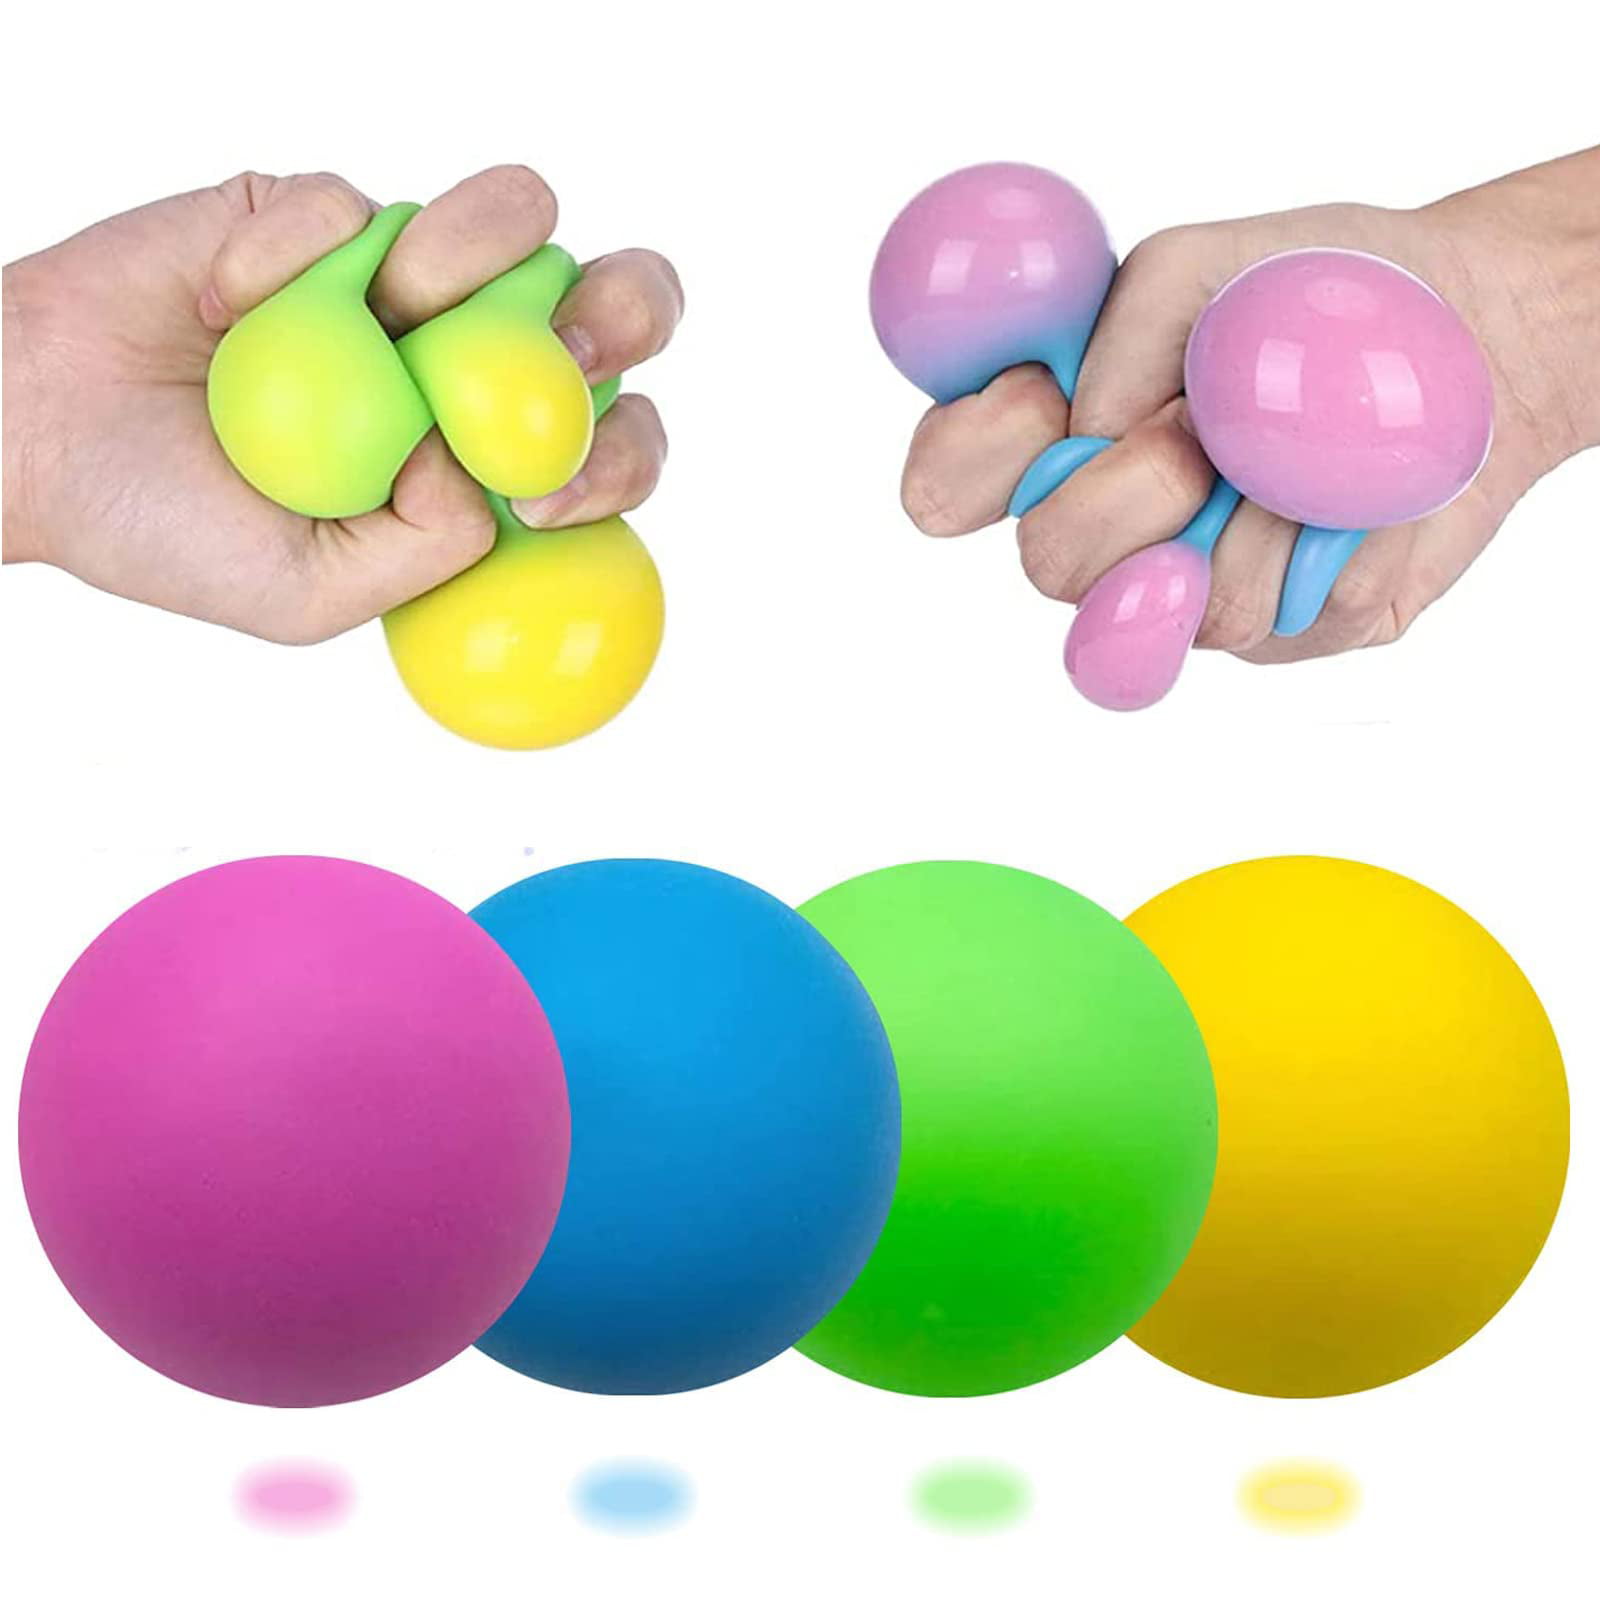 Autism Fidgets Bubble Sensory Reliever Anxiety Stress Squeeze Ball Toy Set 5Pack 